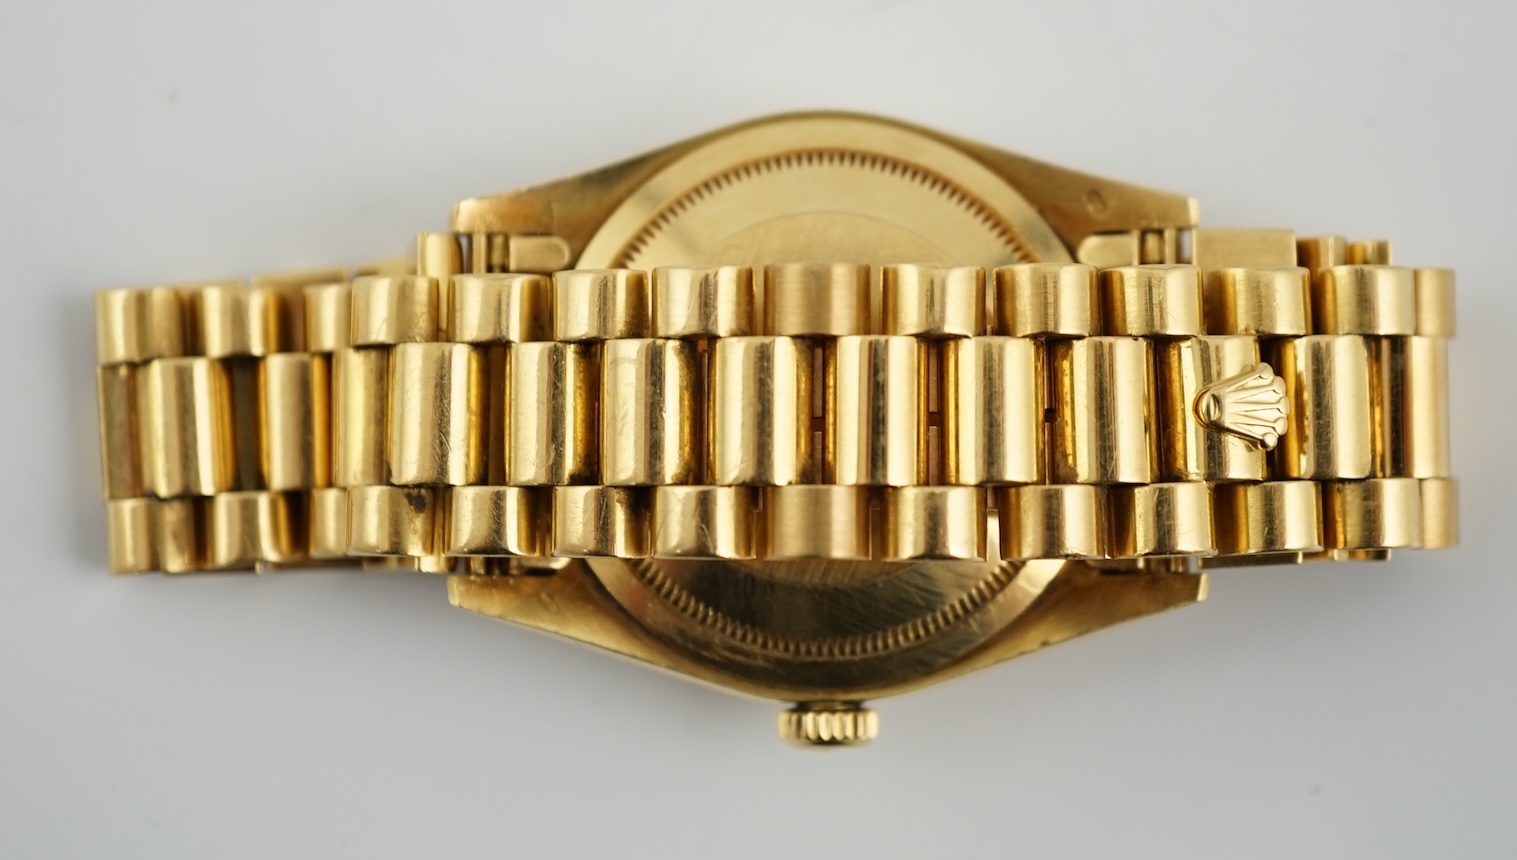 A gentleman's late 1980's 18ct gold Rolex Oyster Perpetual Day/Date wrist watch, on an 18ct gold Rolex bracelet with deployment clasp